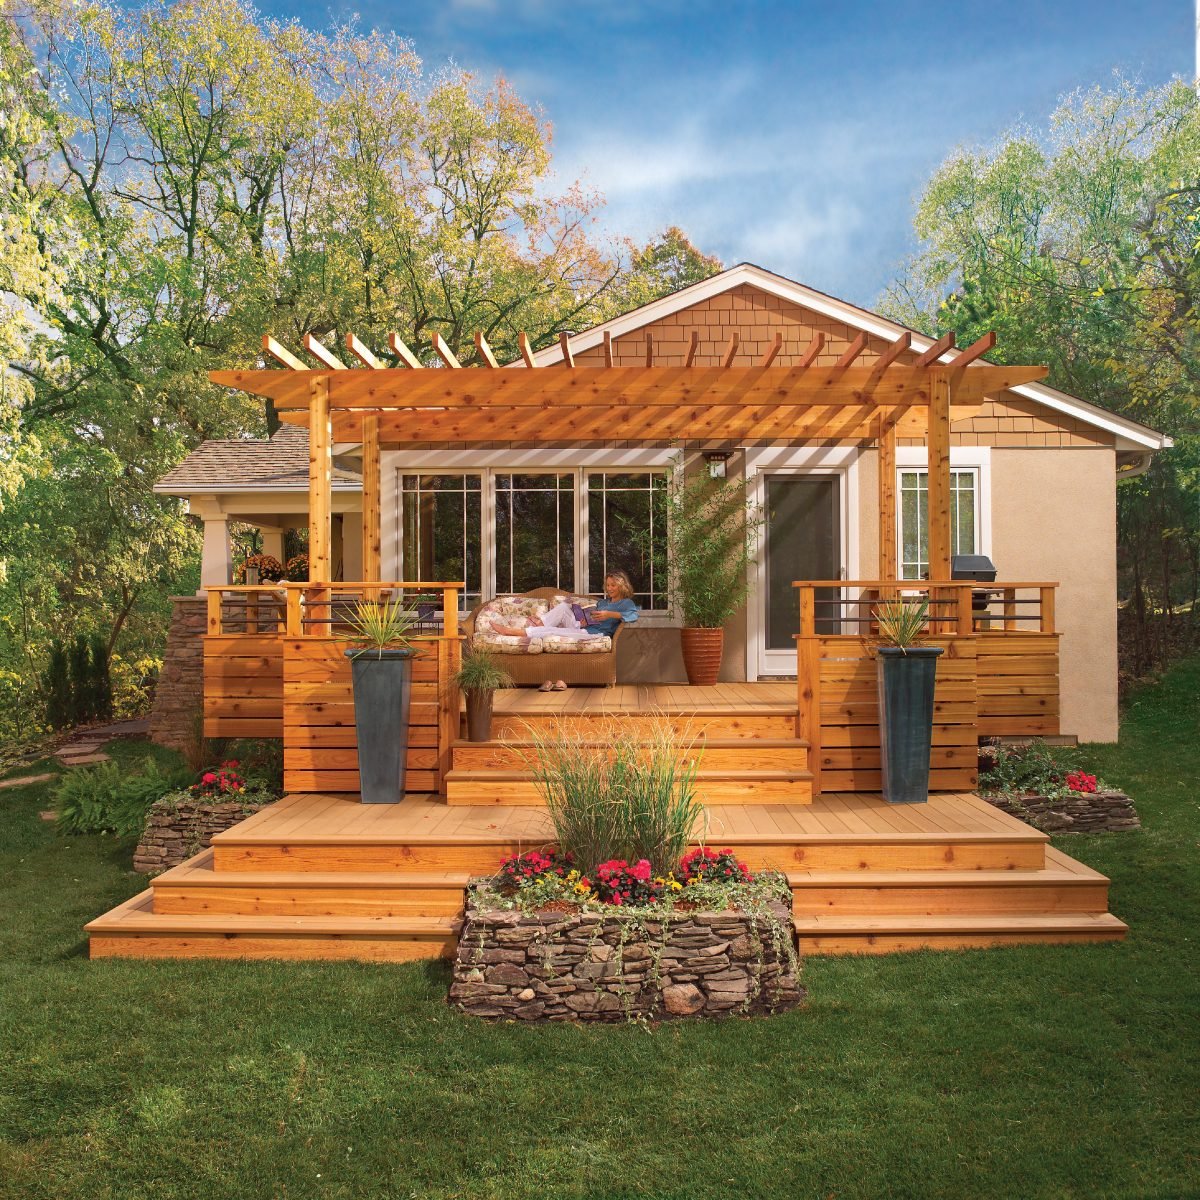 How To Build a Small Deck with Custom Features